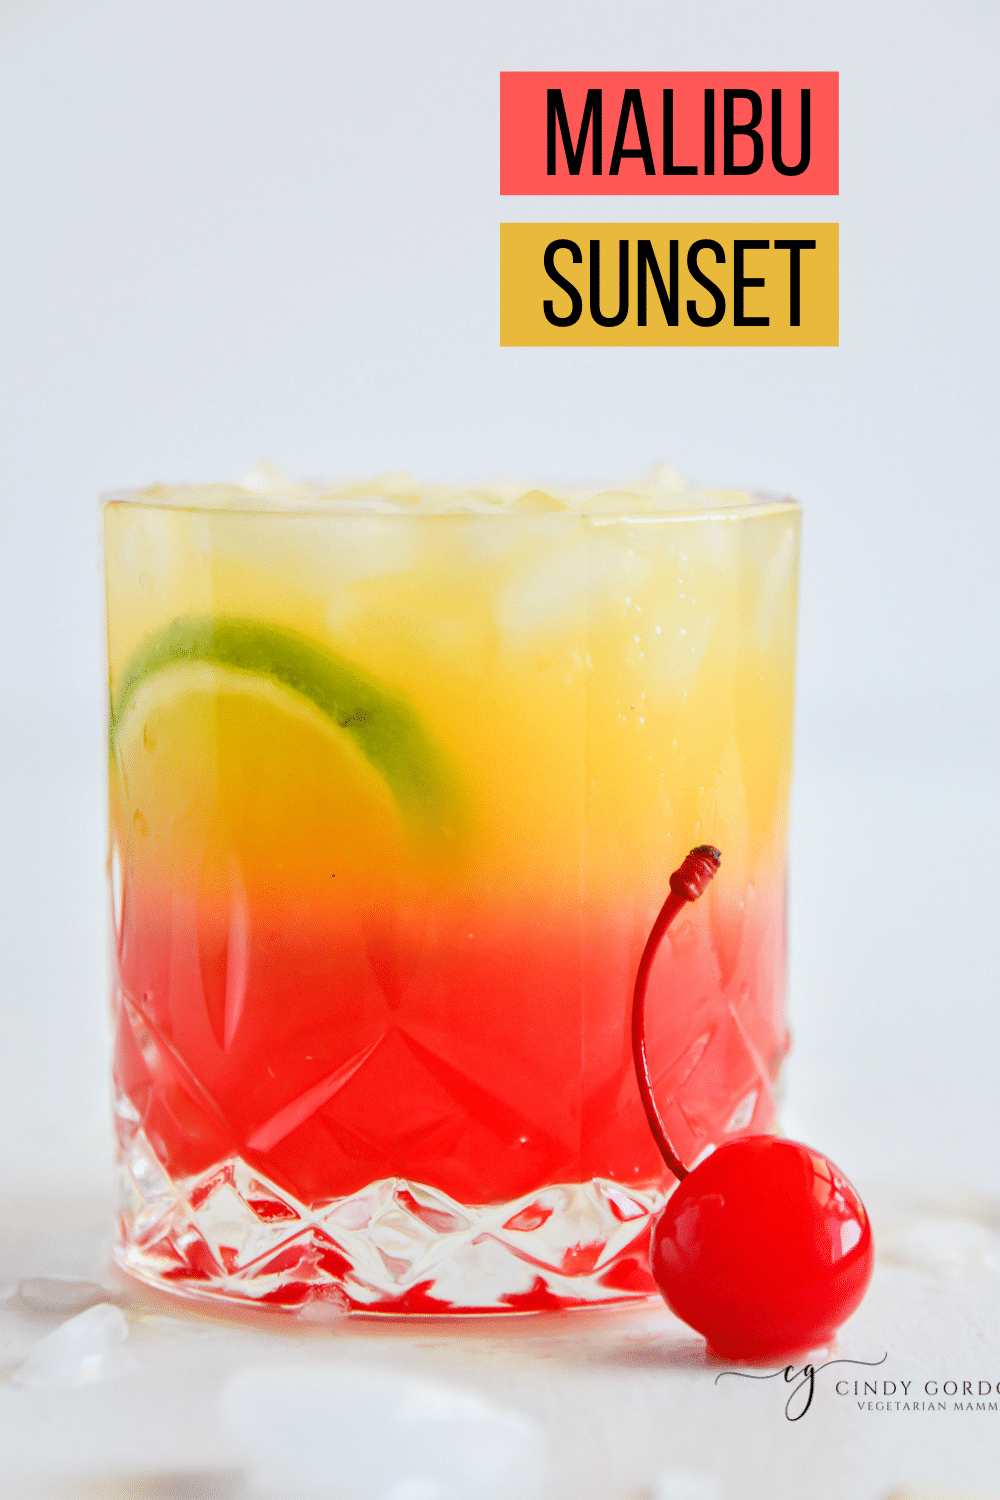 a highball glass with a layered red and yellow malibu sunset drink. Garnished with a cherry and lime slices. Text overlay says Malibu Sunset